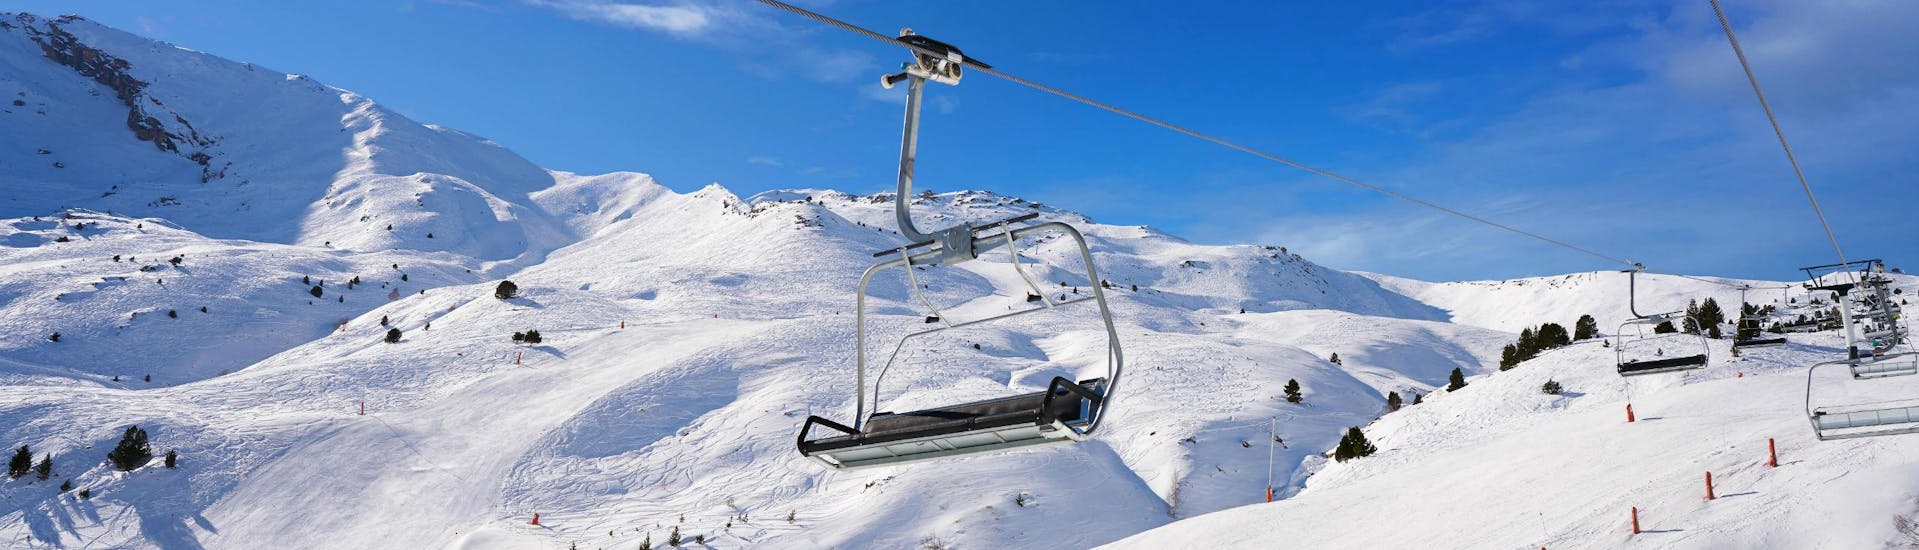 An image of a chair lift in the ski resort of Cerler, where local ski schools offer a selection of ski lessons for those who want to learn to ski.